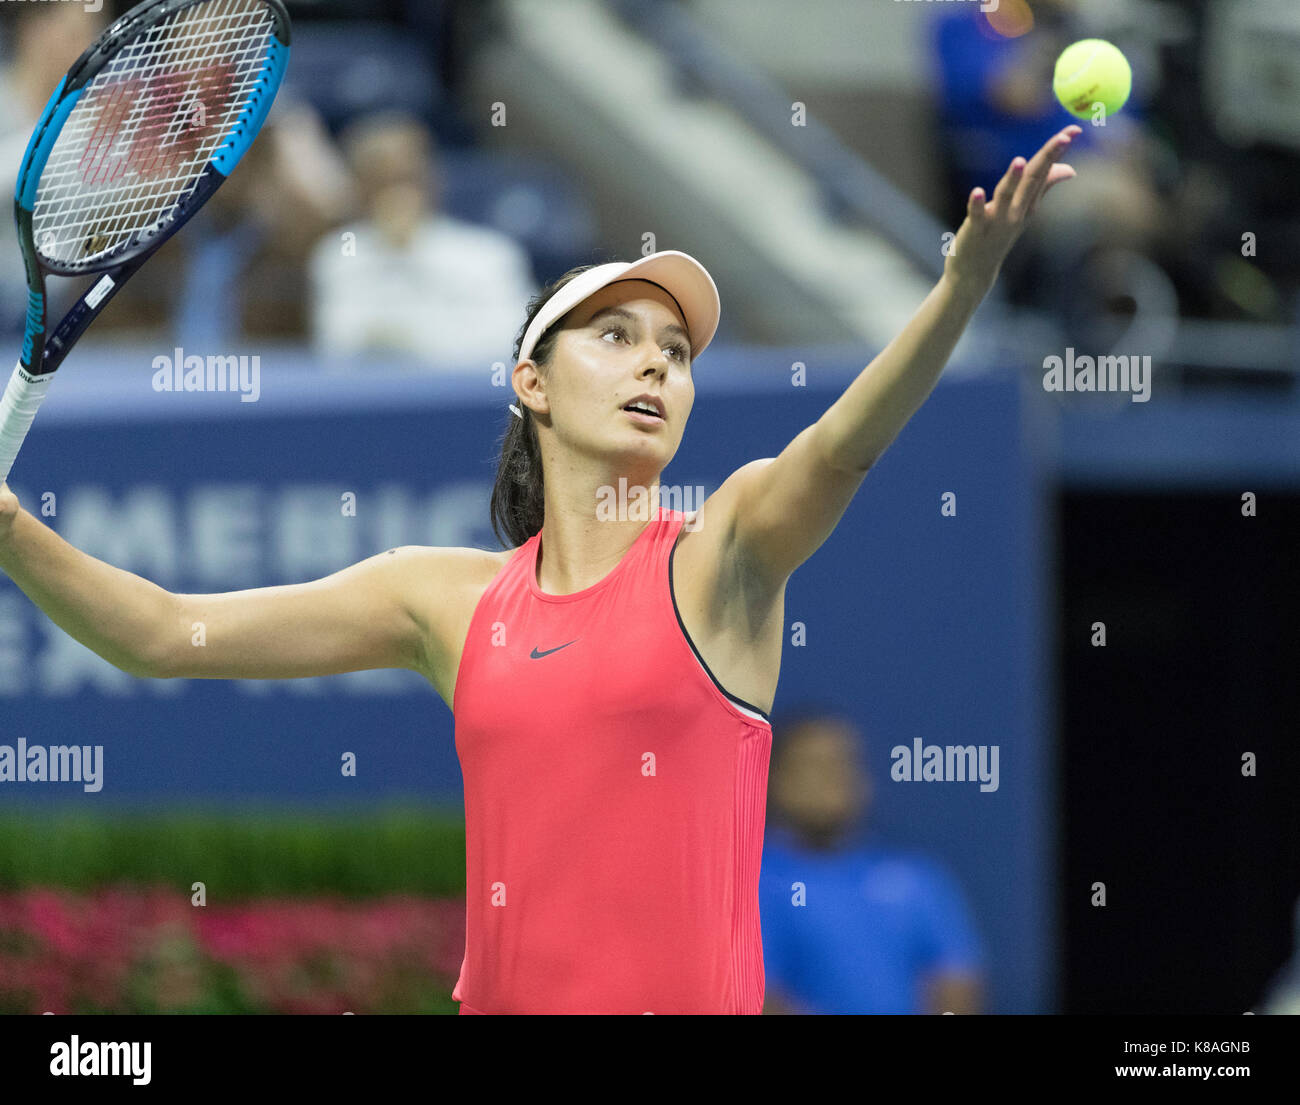 New York, NY USA - August 30, 2017: Oceane Dodin of France serves during match against Venus Williams of USA at US Open Championships at Billie Jean King National Tennis Center Stock Photo